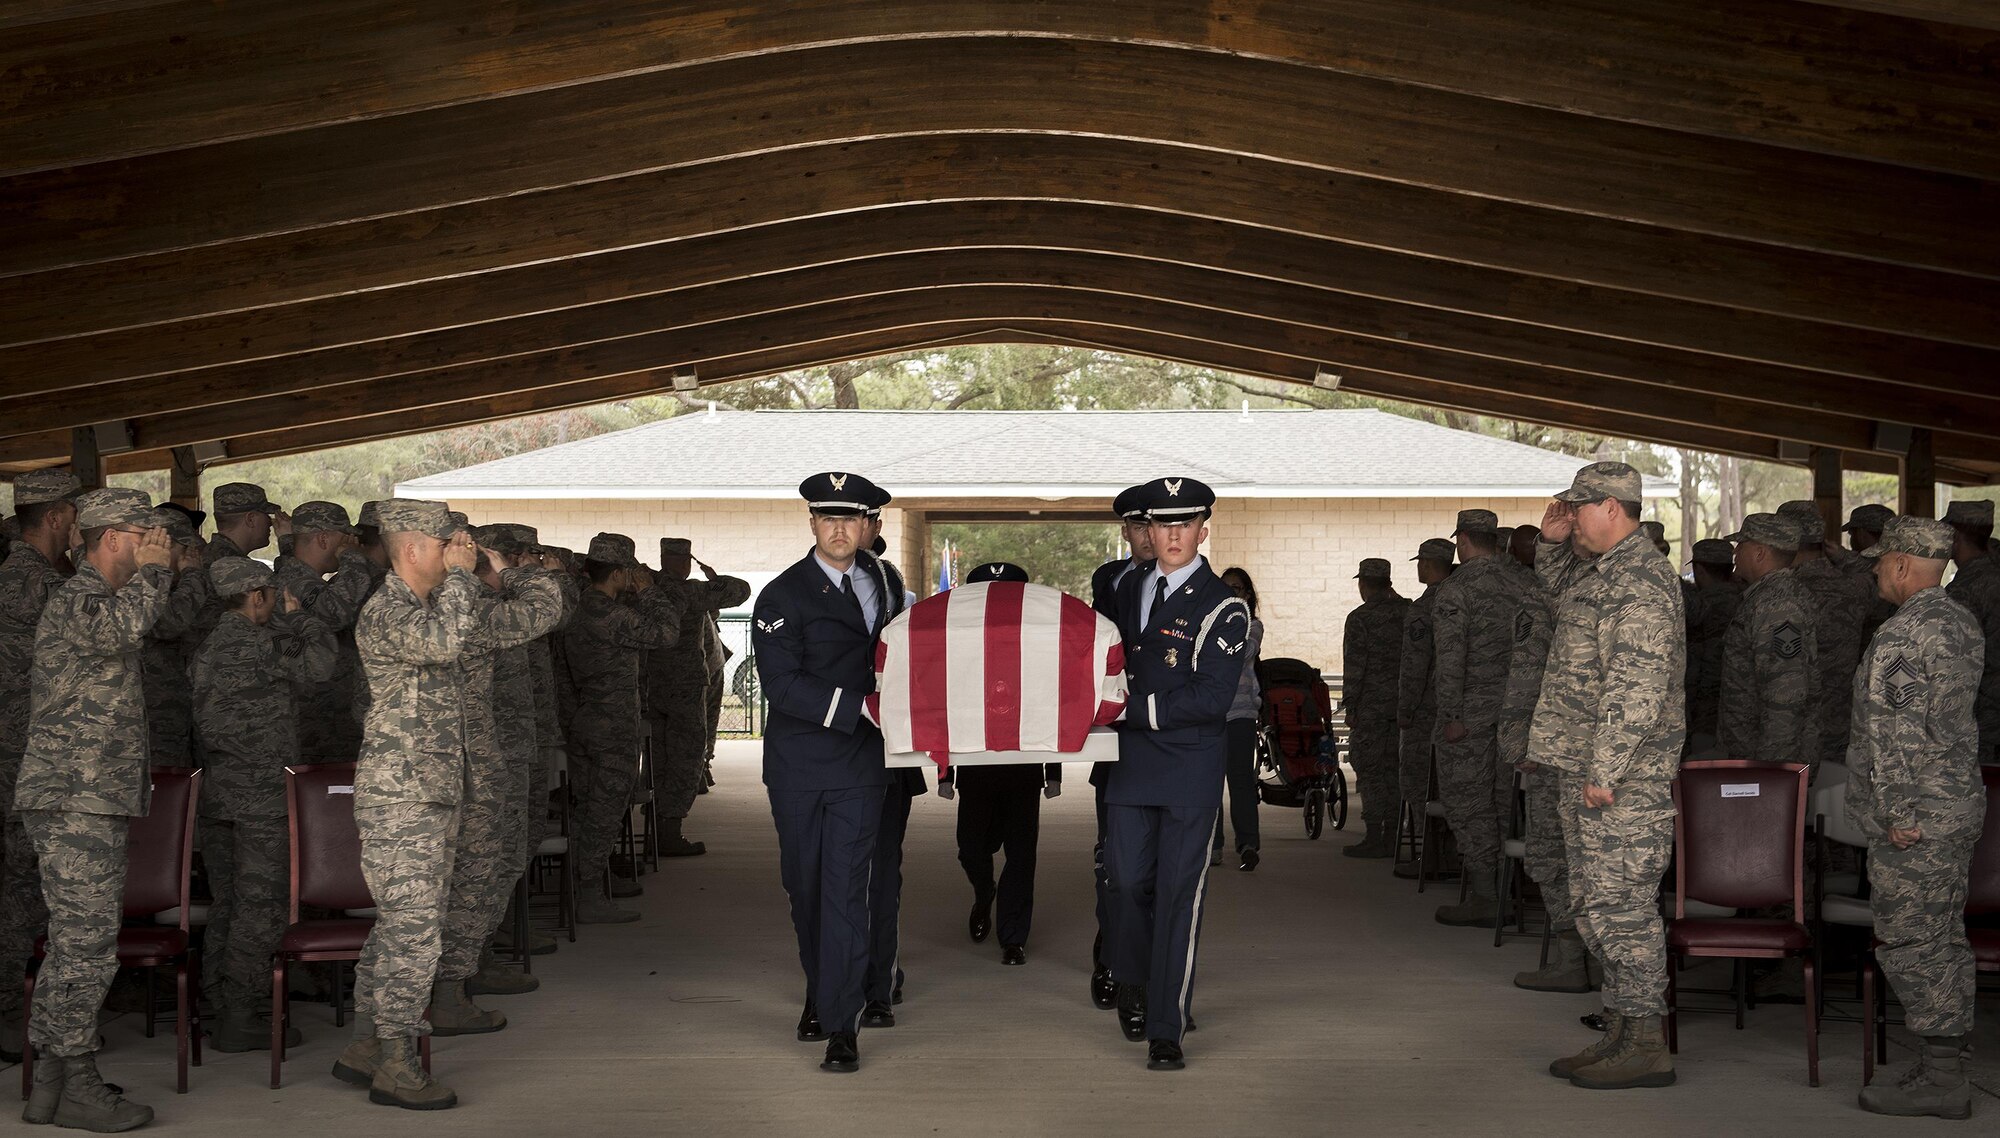 People in attendance salute as the casket, carried by Eglin Honor Guard, passes by during the unit’s graduation ceremony at Eglin Air Force Base, Fla., March 1.  Approximately 12 new Airmen graduated from the 120-plus-hour course. The graduation performance includes flag detail, rifle volley, pall bearers and bugler for friends, family and unit commanders. (U.S. Air Force photo/Samuel King Jr.)